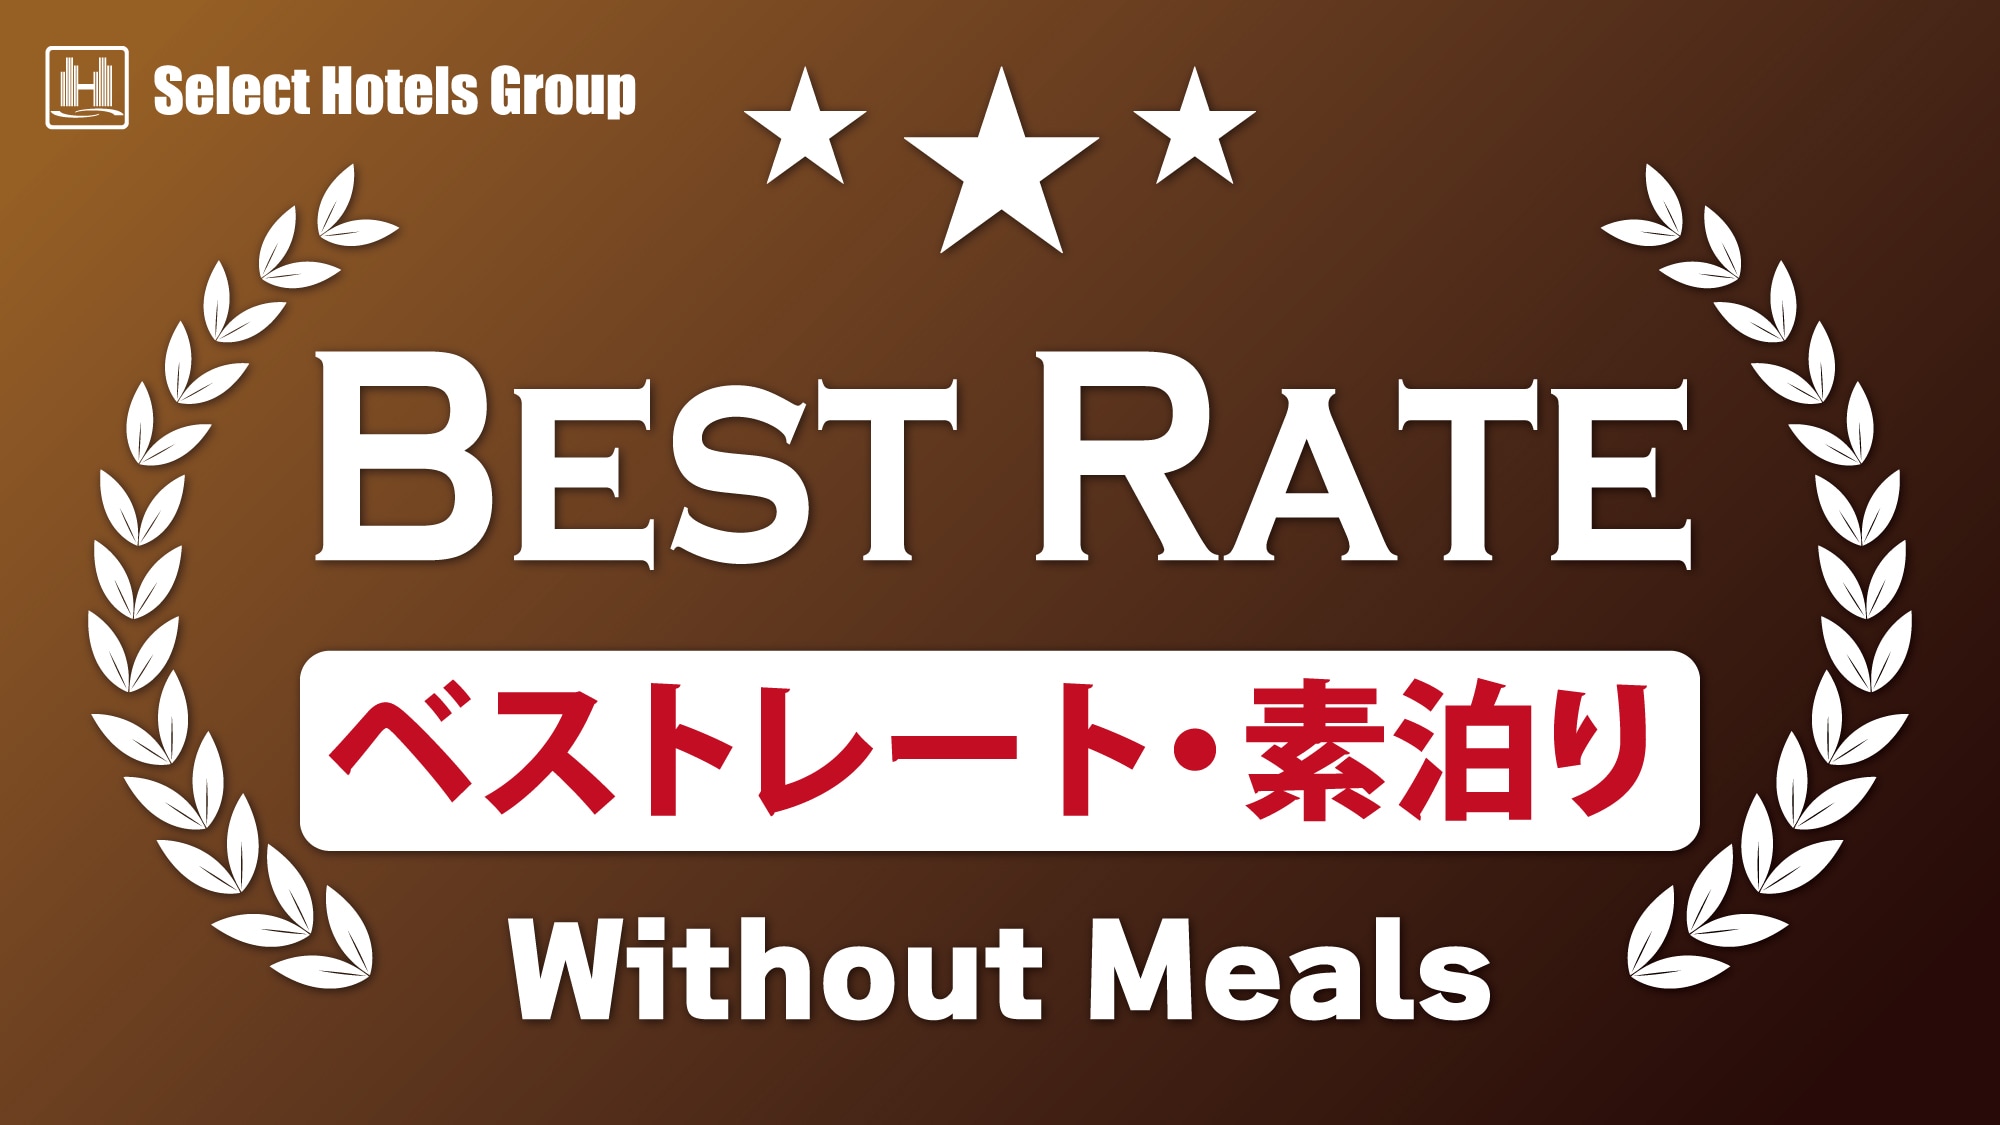 Best_Stay without meals